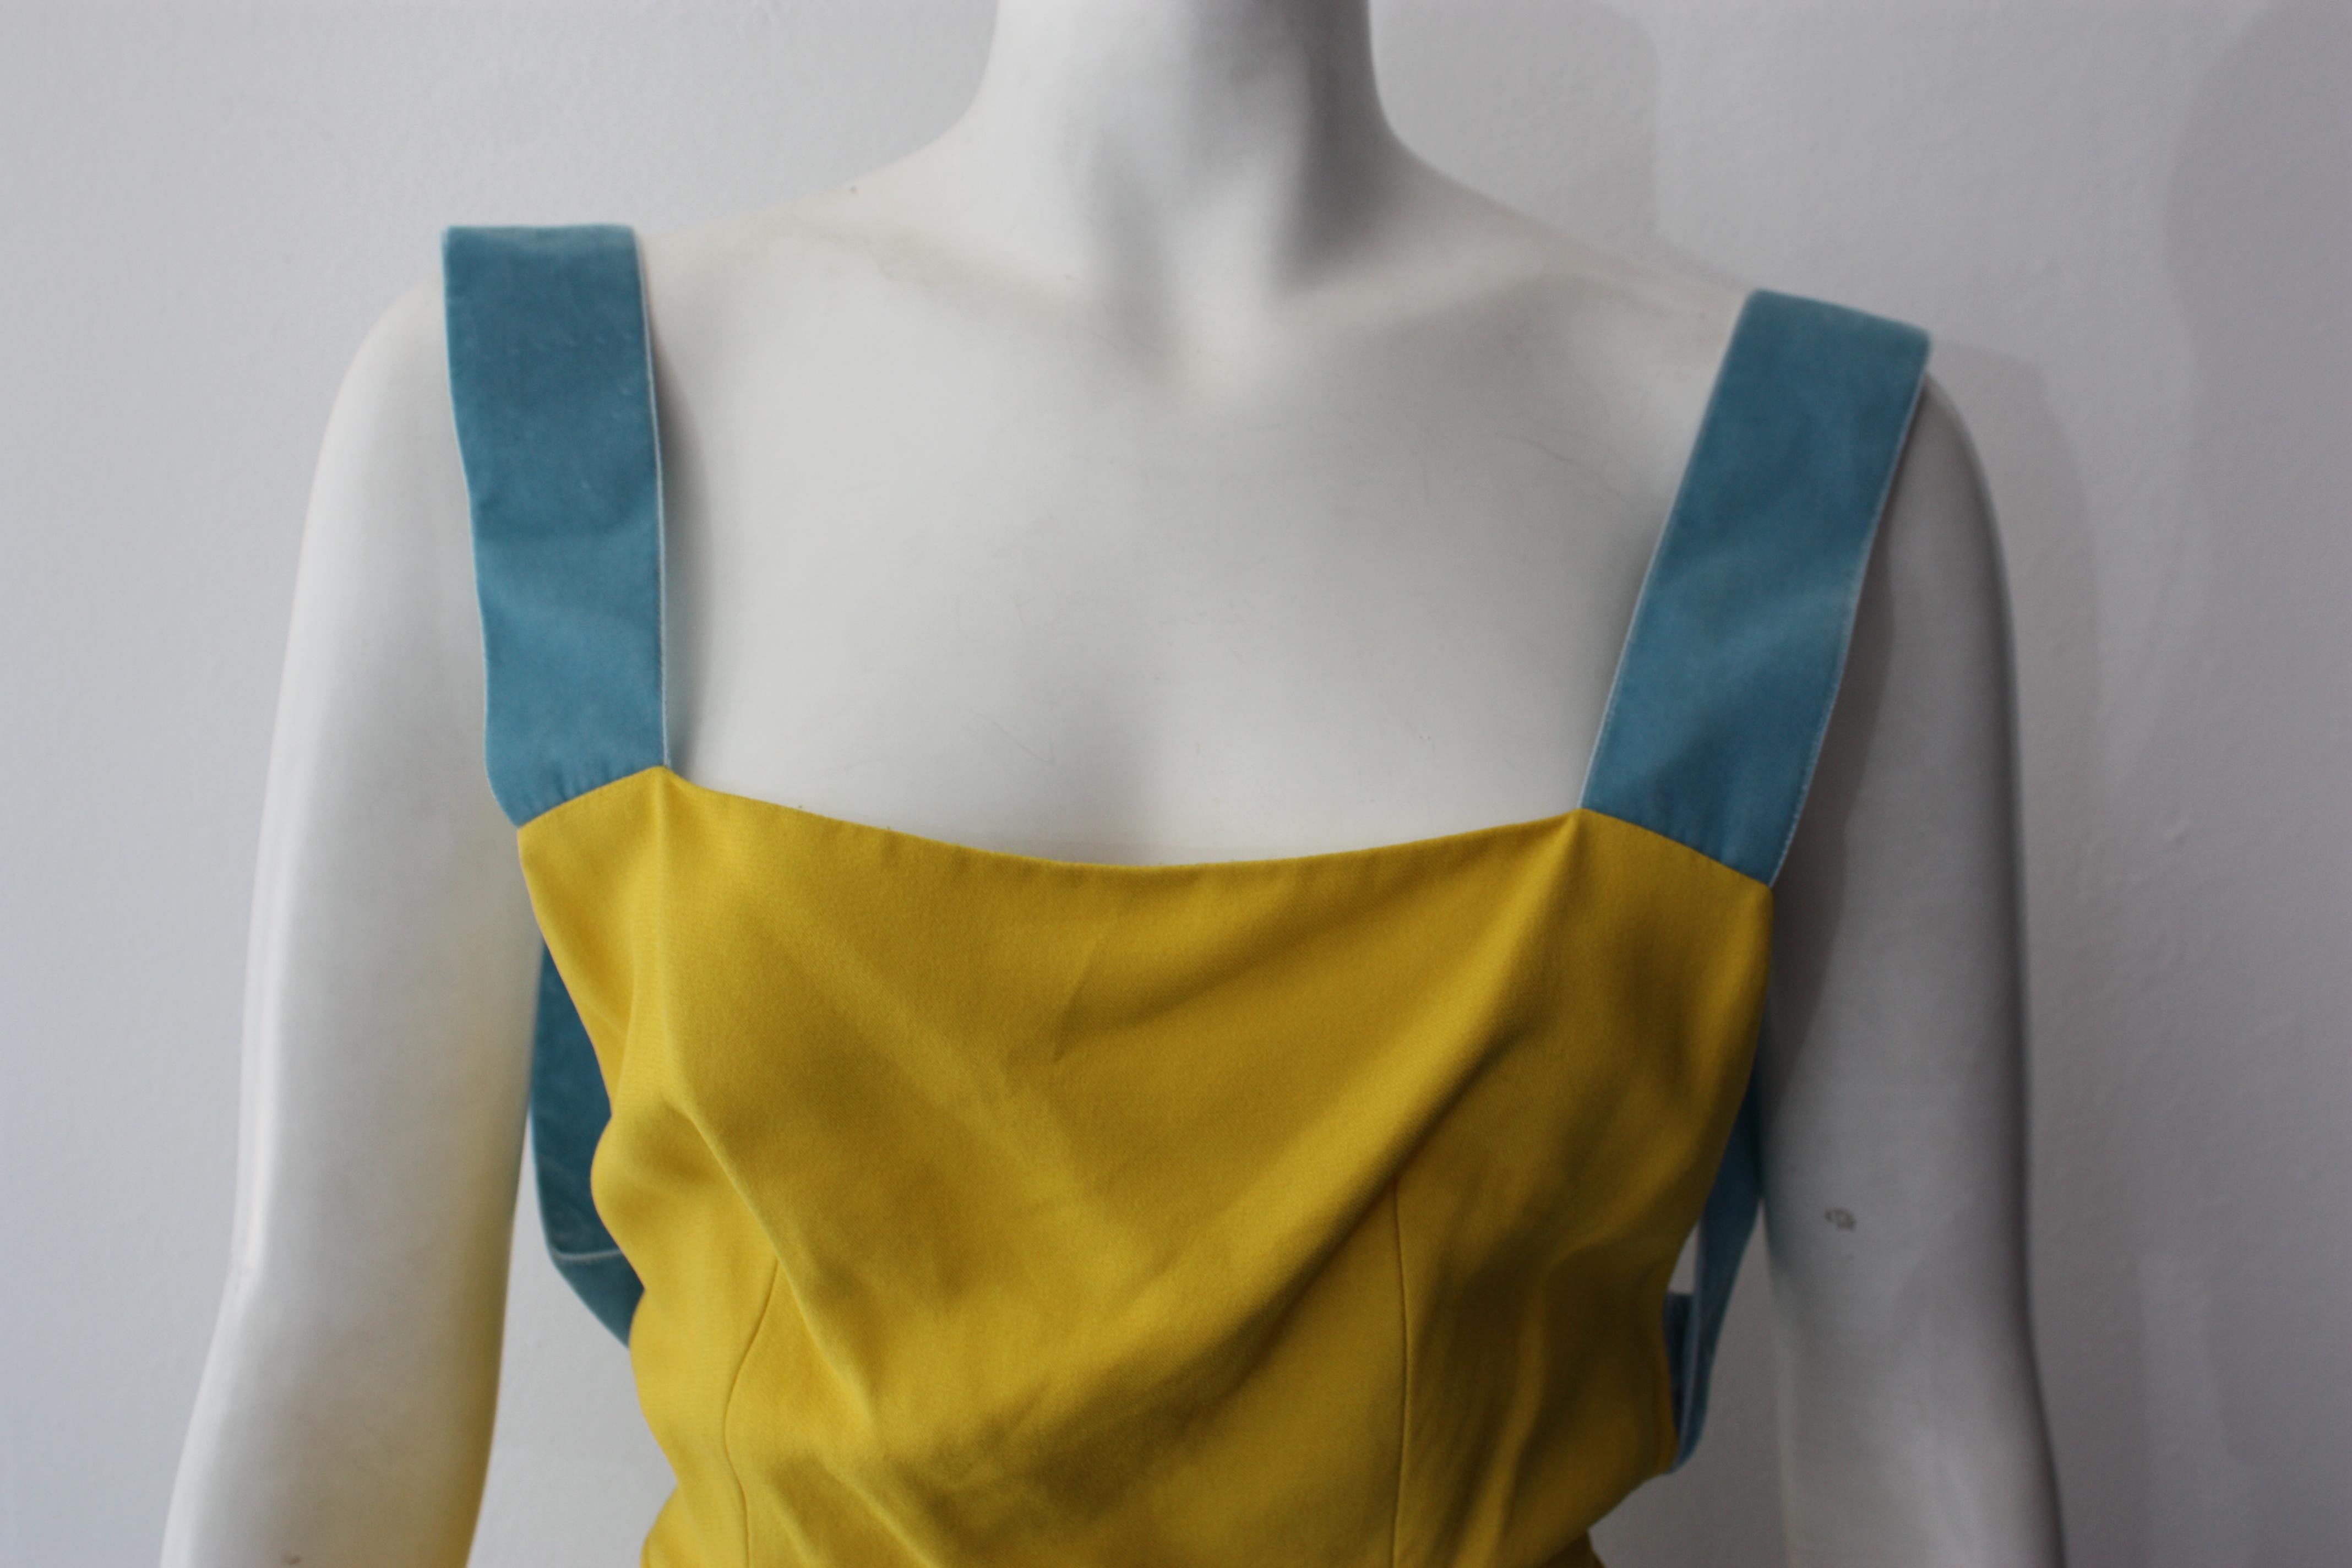 Prada Special Edition yellow dress with blue velvet straps. Back bow. Side zip.

Size 36
100% viscose